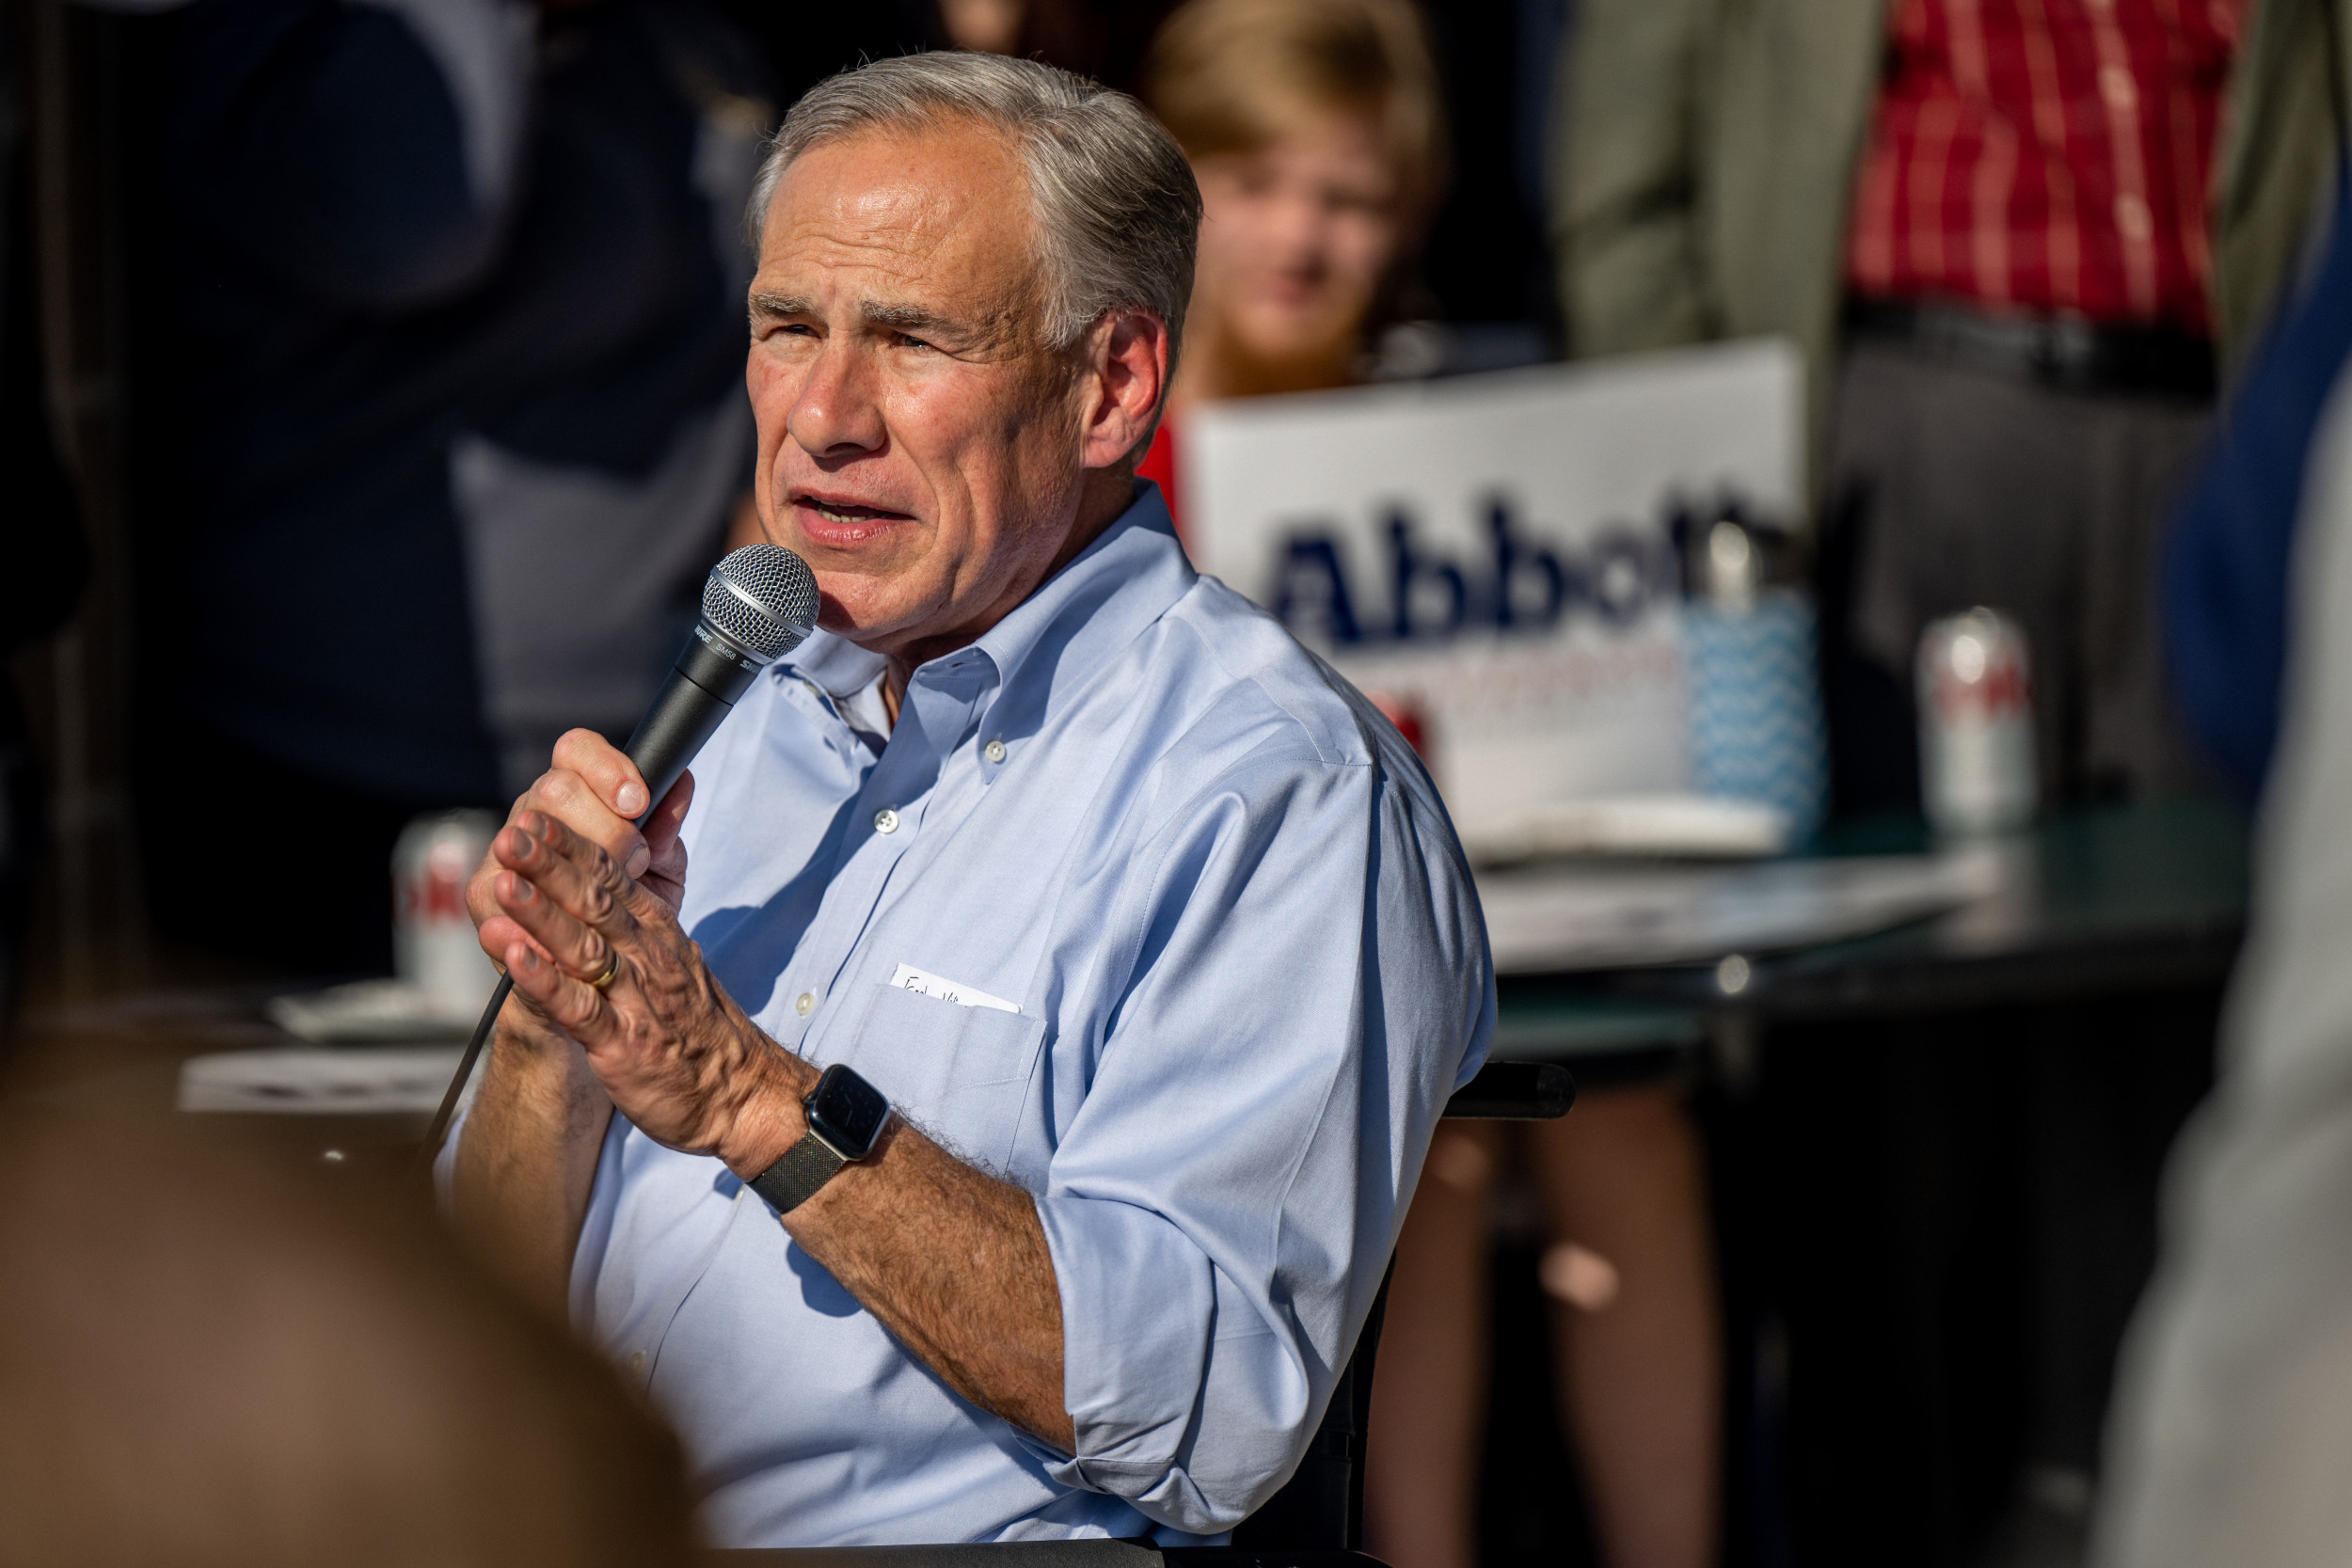 greg abbott rebuked by largest texas newspaper for 'sowing chaos'